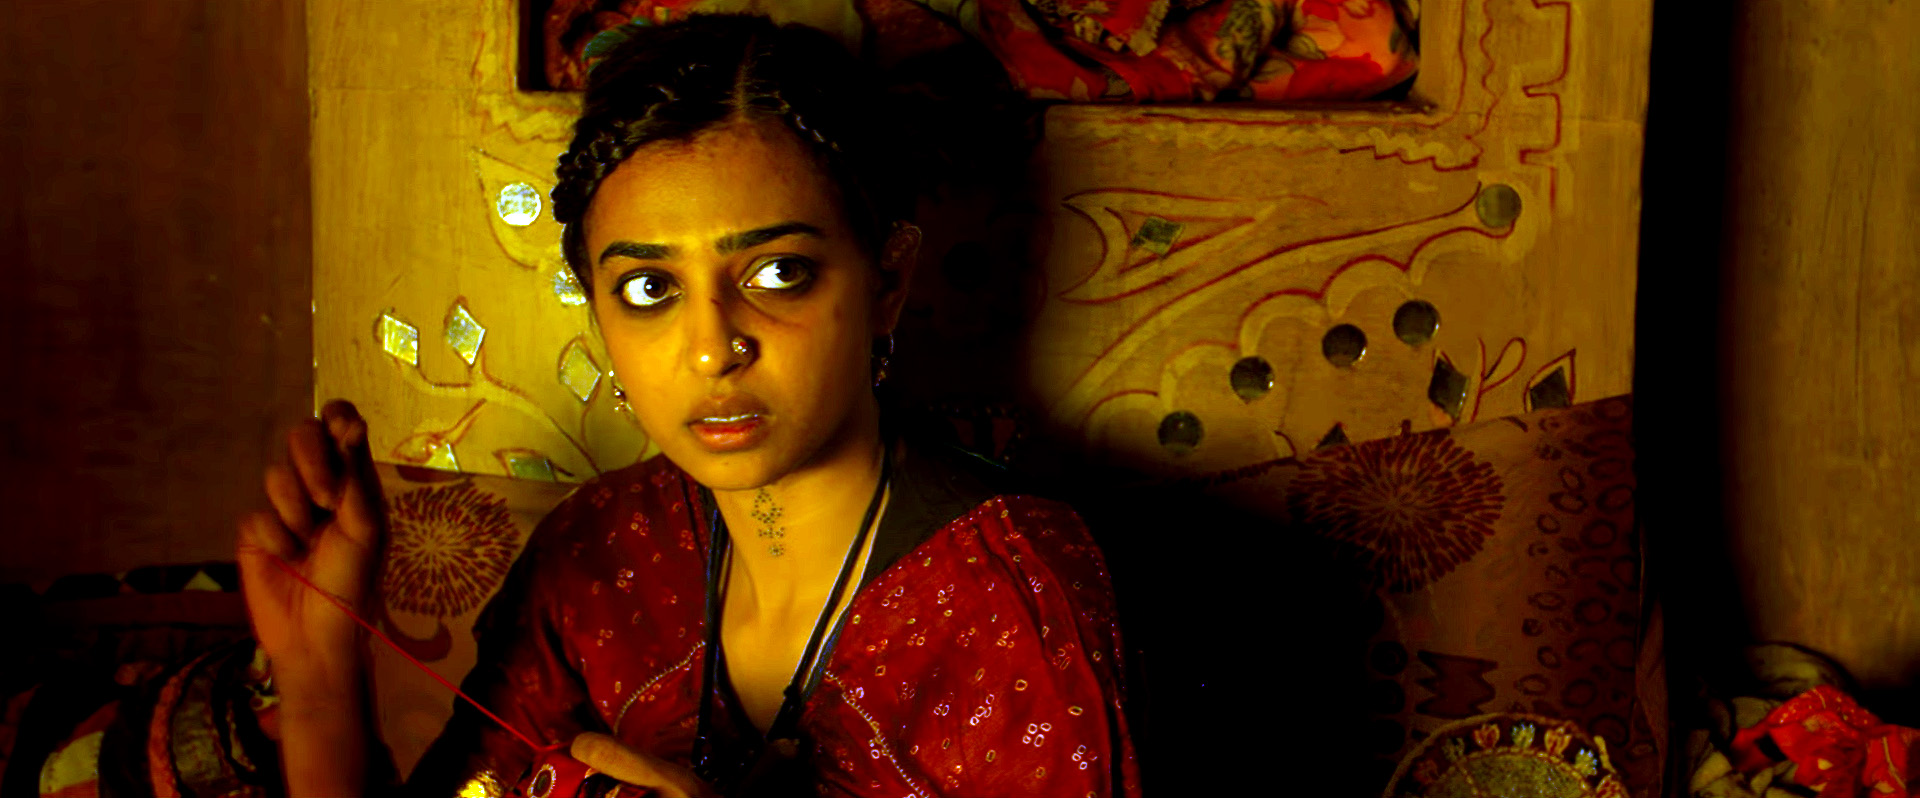 Image result for radhika apte in parched